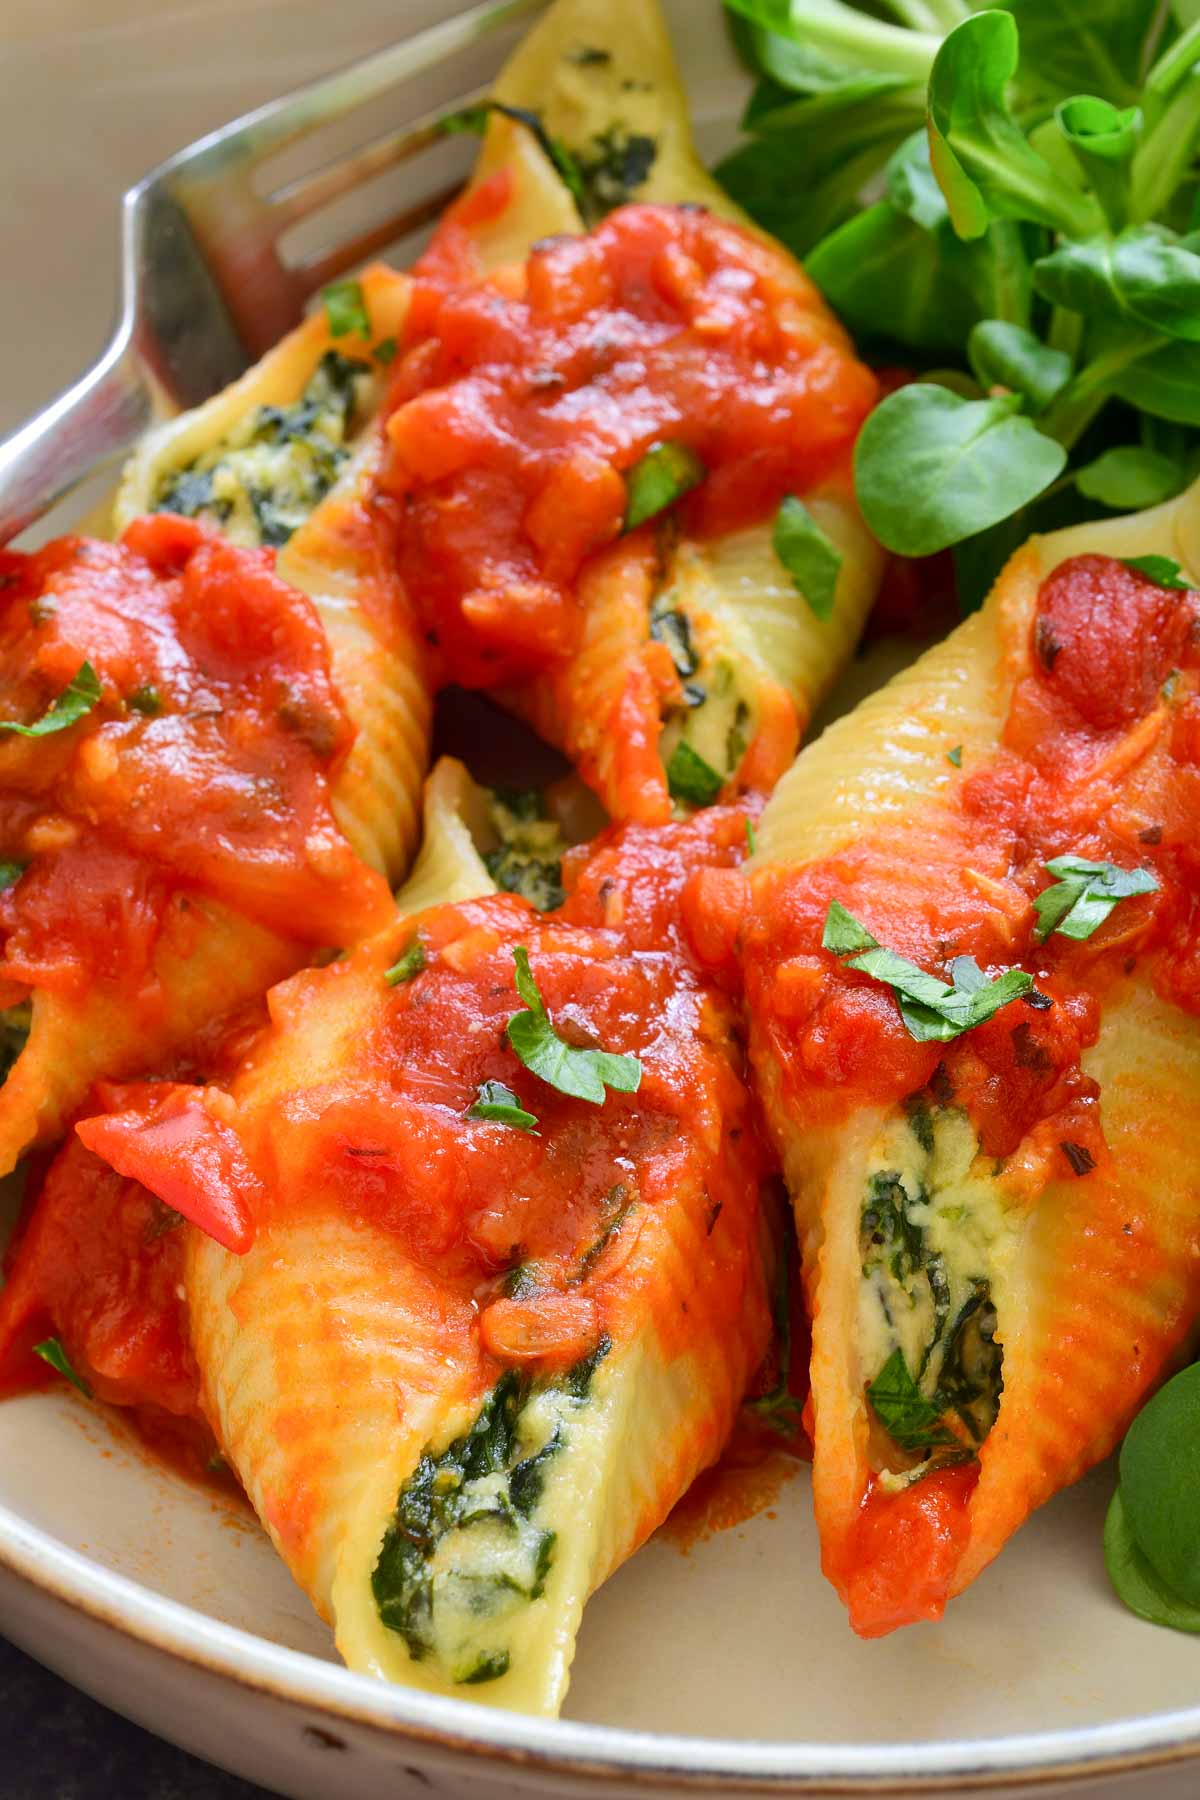 A close-up photo of four vegan stuffed shells in a grey bowl.